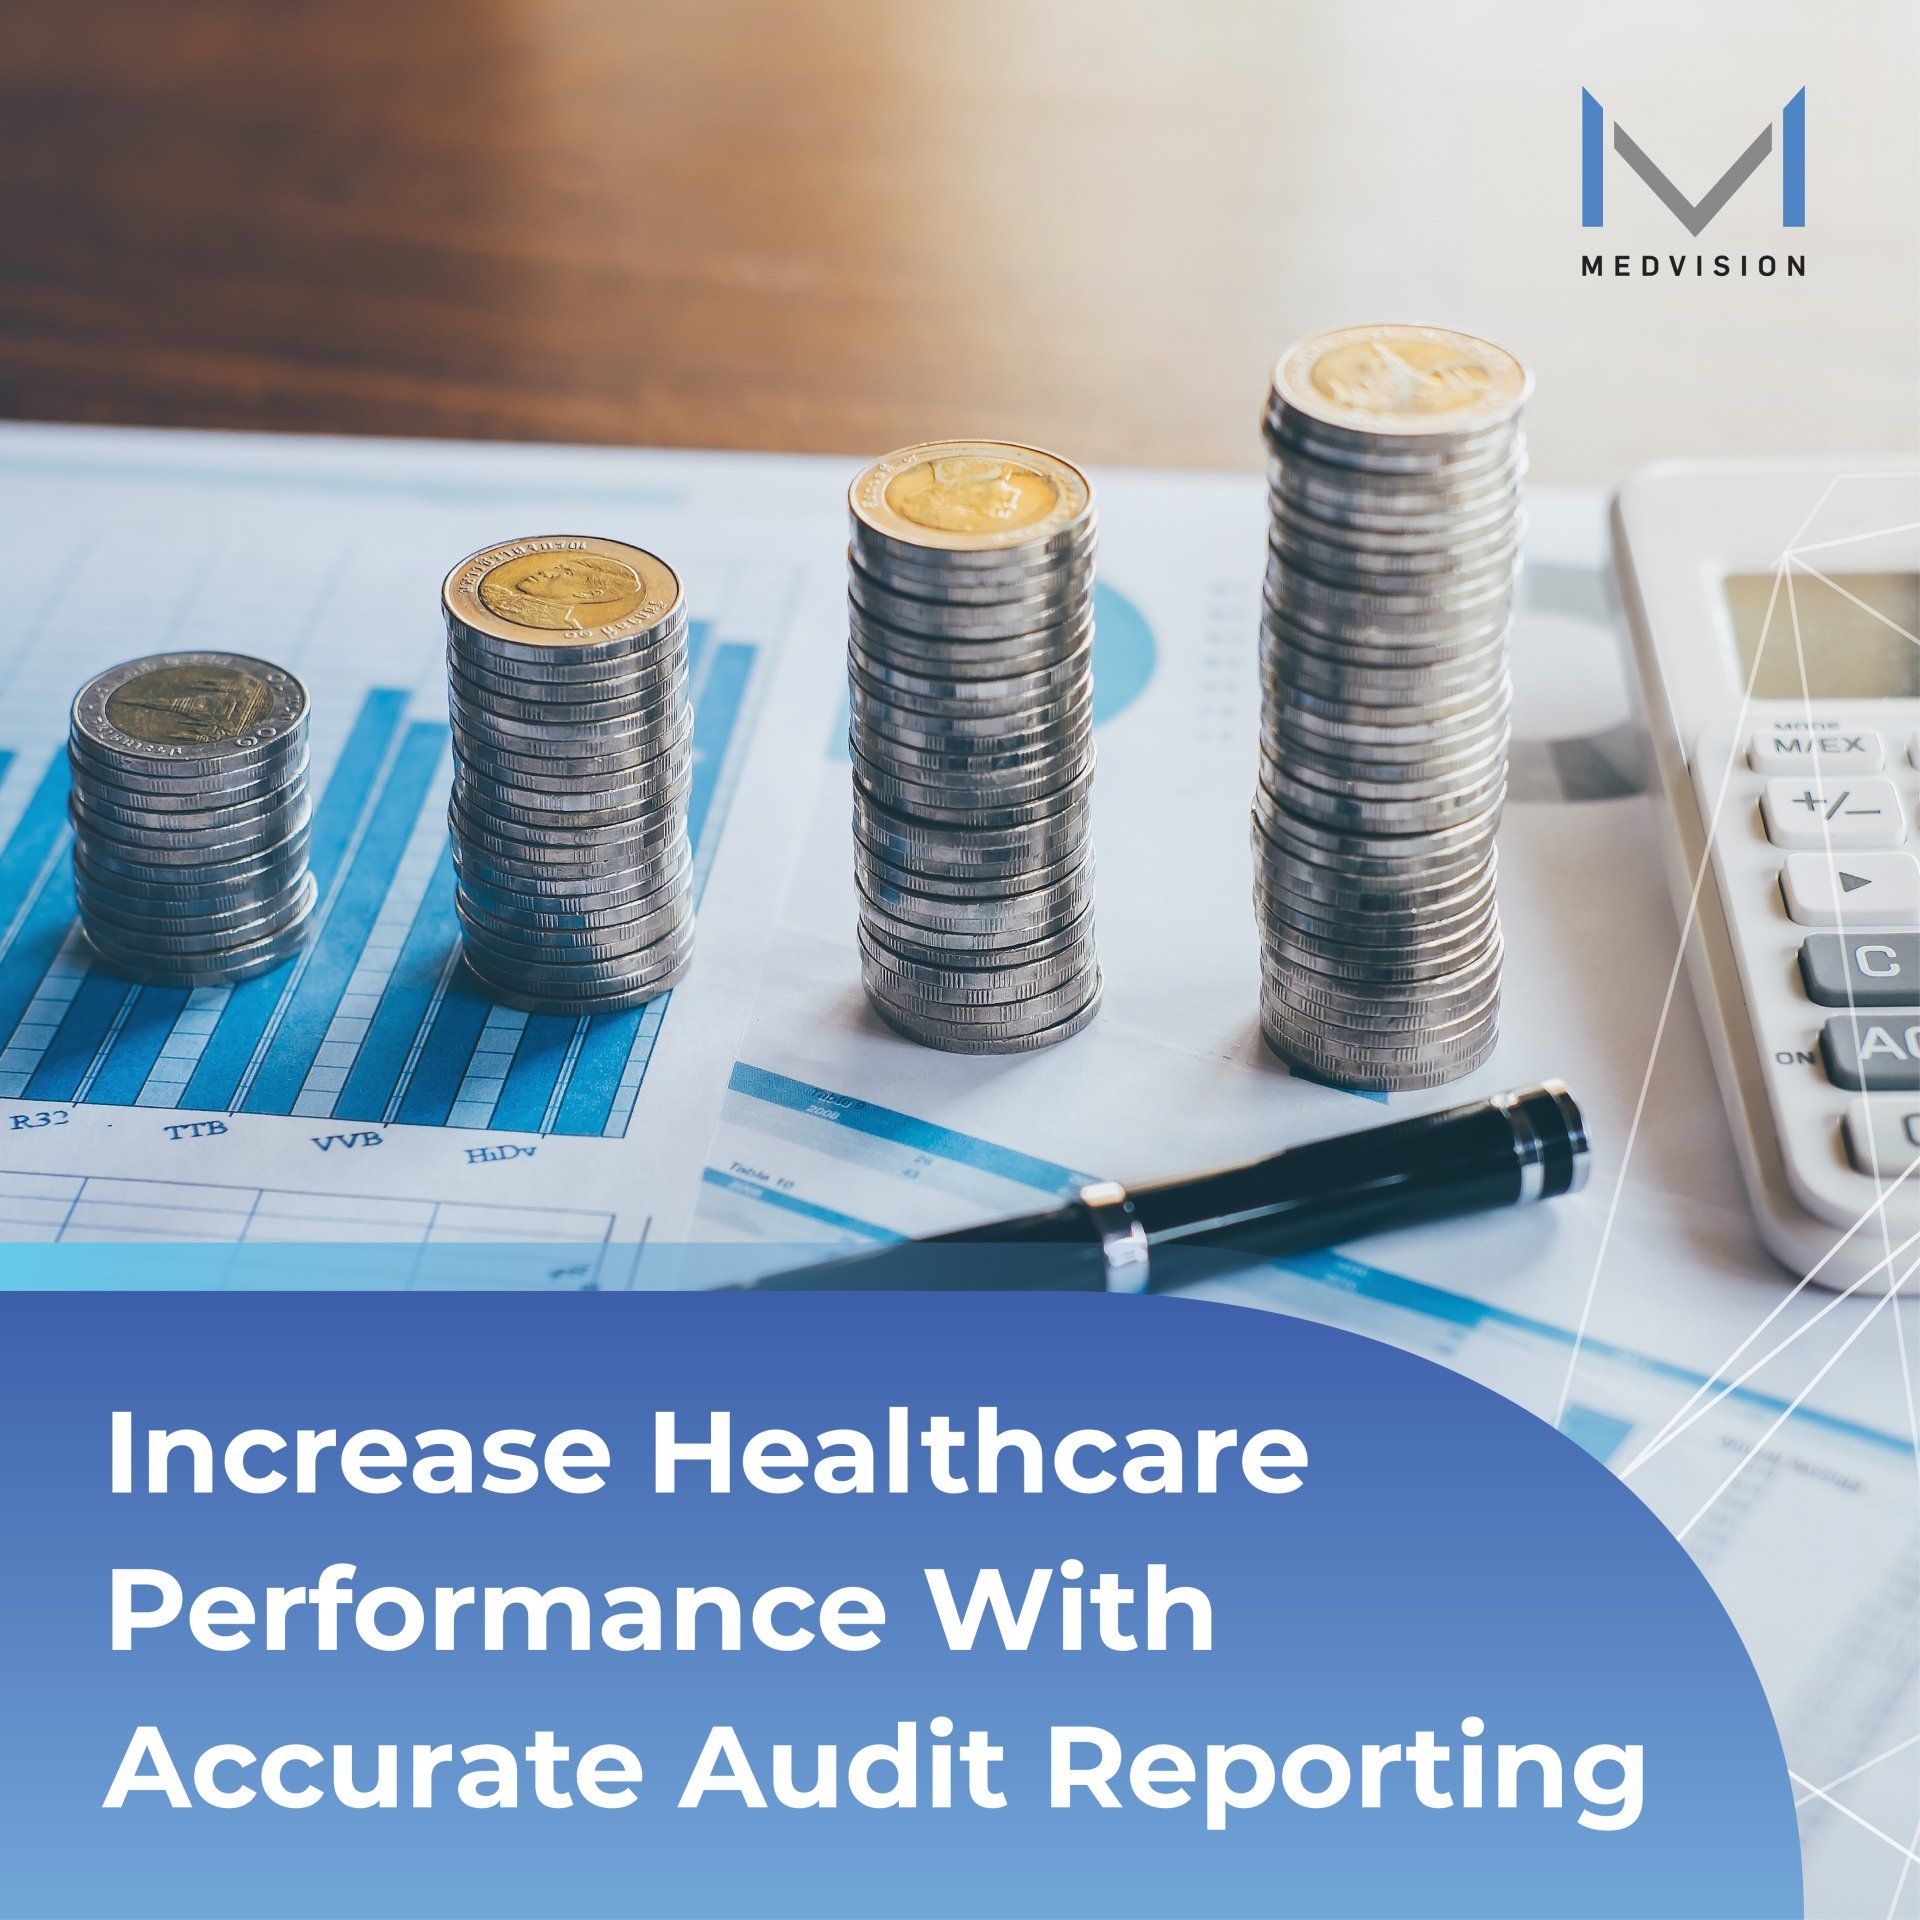 Increase Healthcare Performance With Accurate Audit Reporting